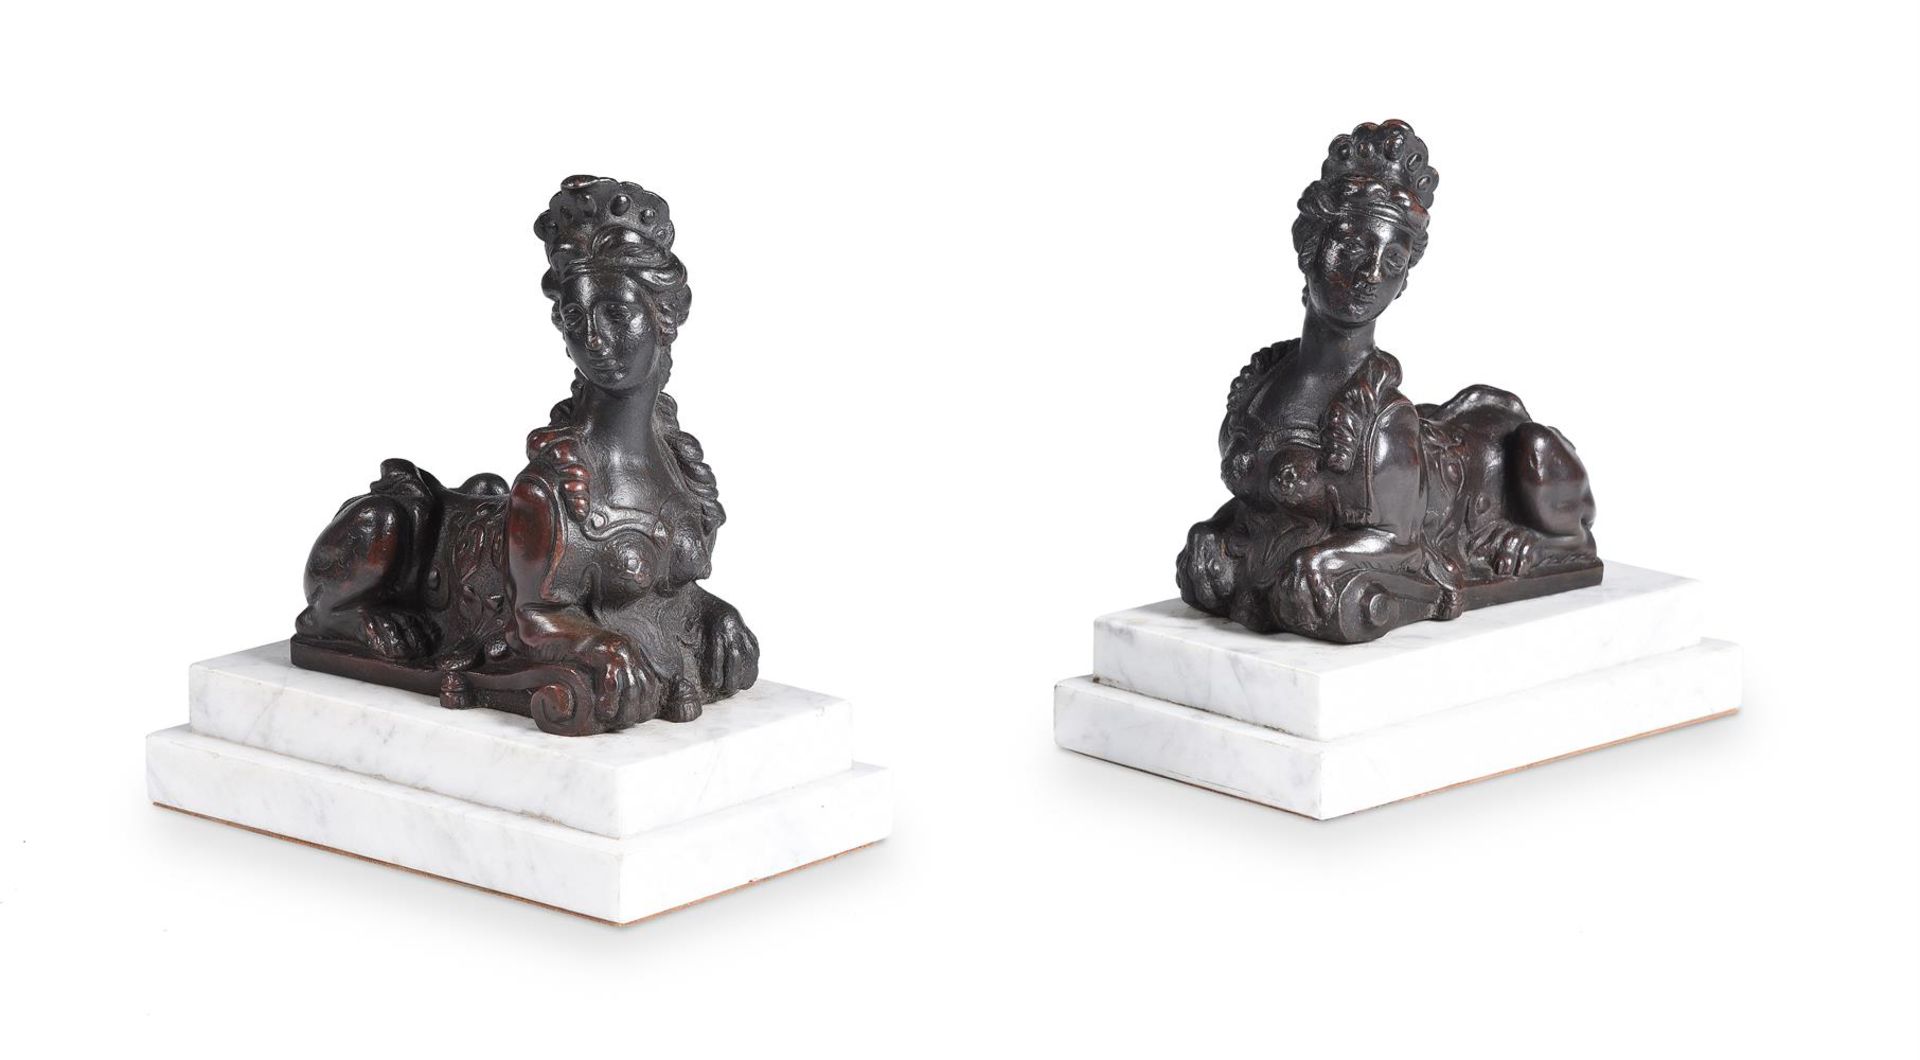 A PAIR OF FRENCH BRONZE SPHINXES, 18TH CENTURY